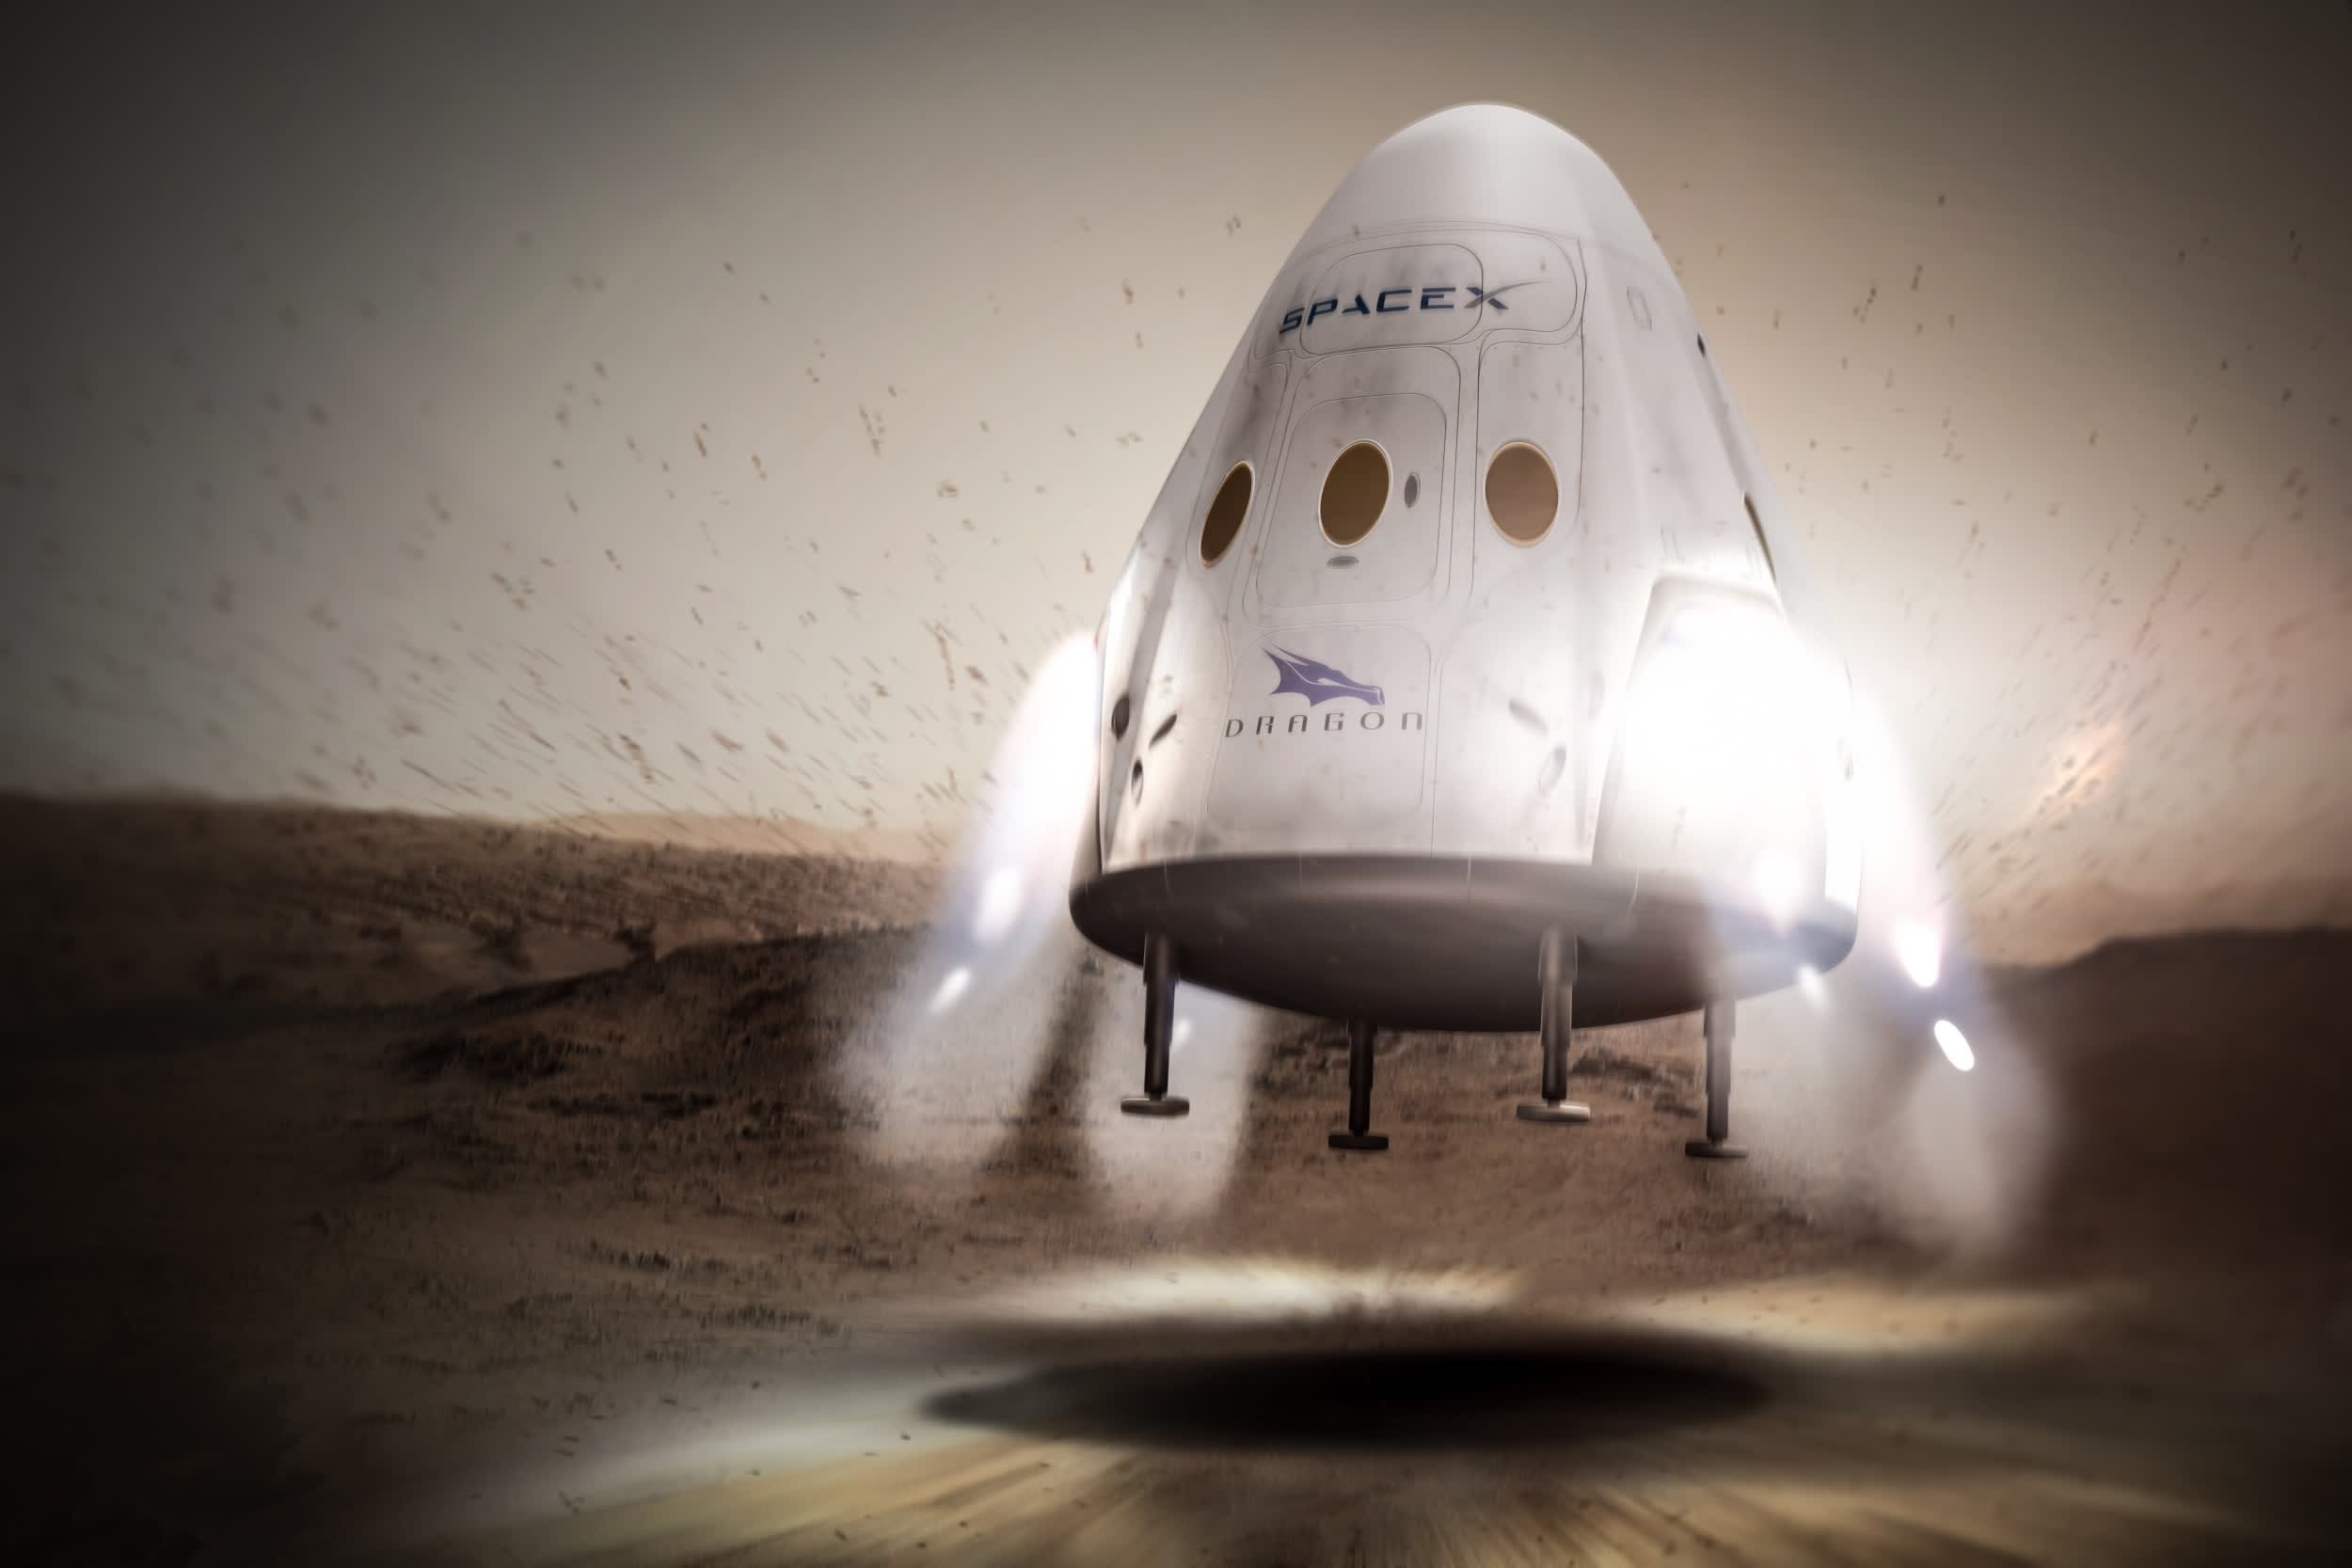 Elon Musk says SpaceX will land humans on Mars within 5 to 10 years